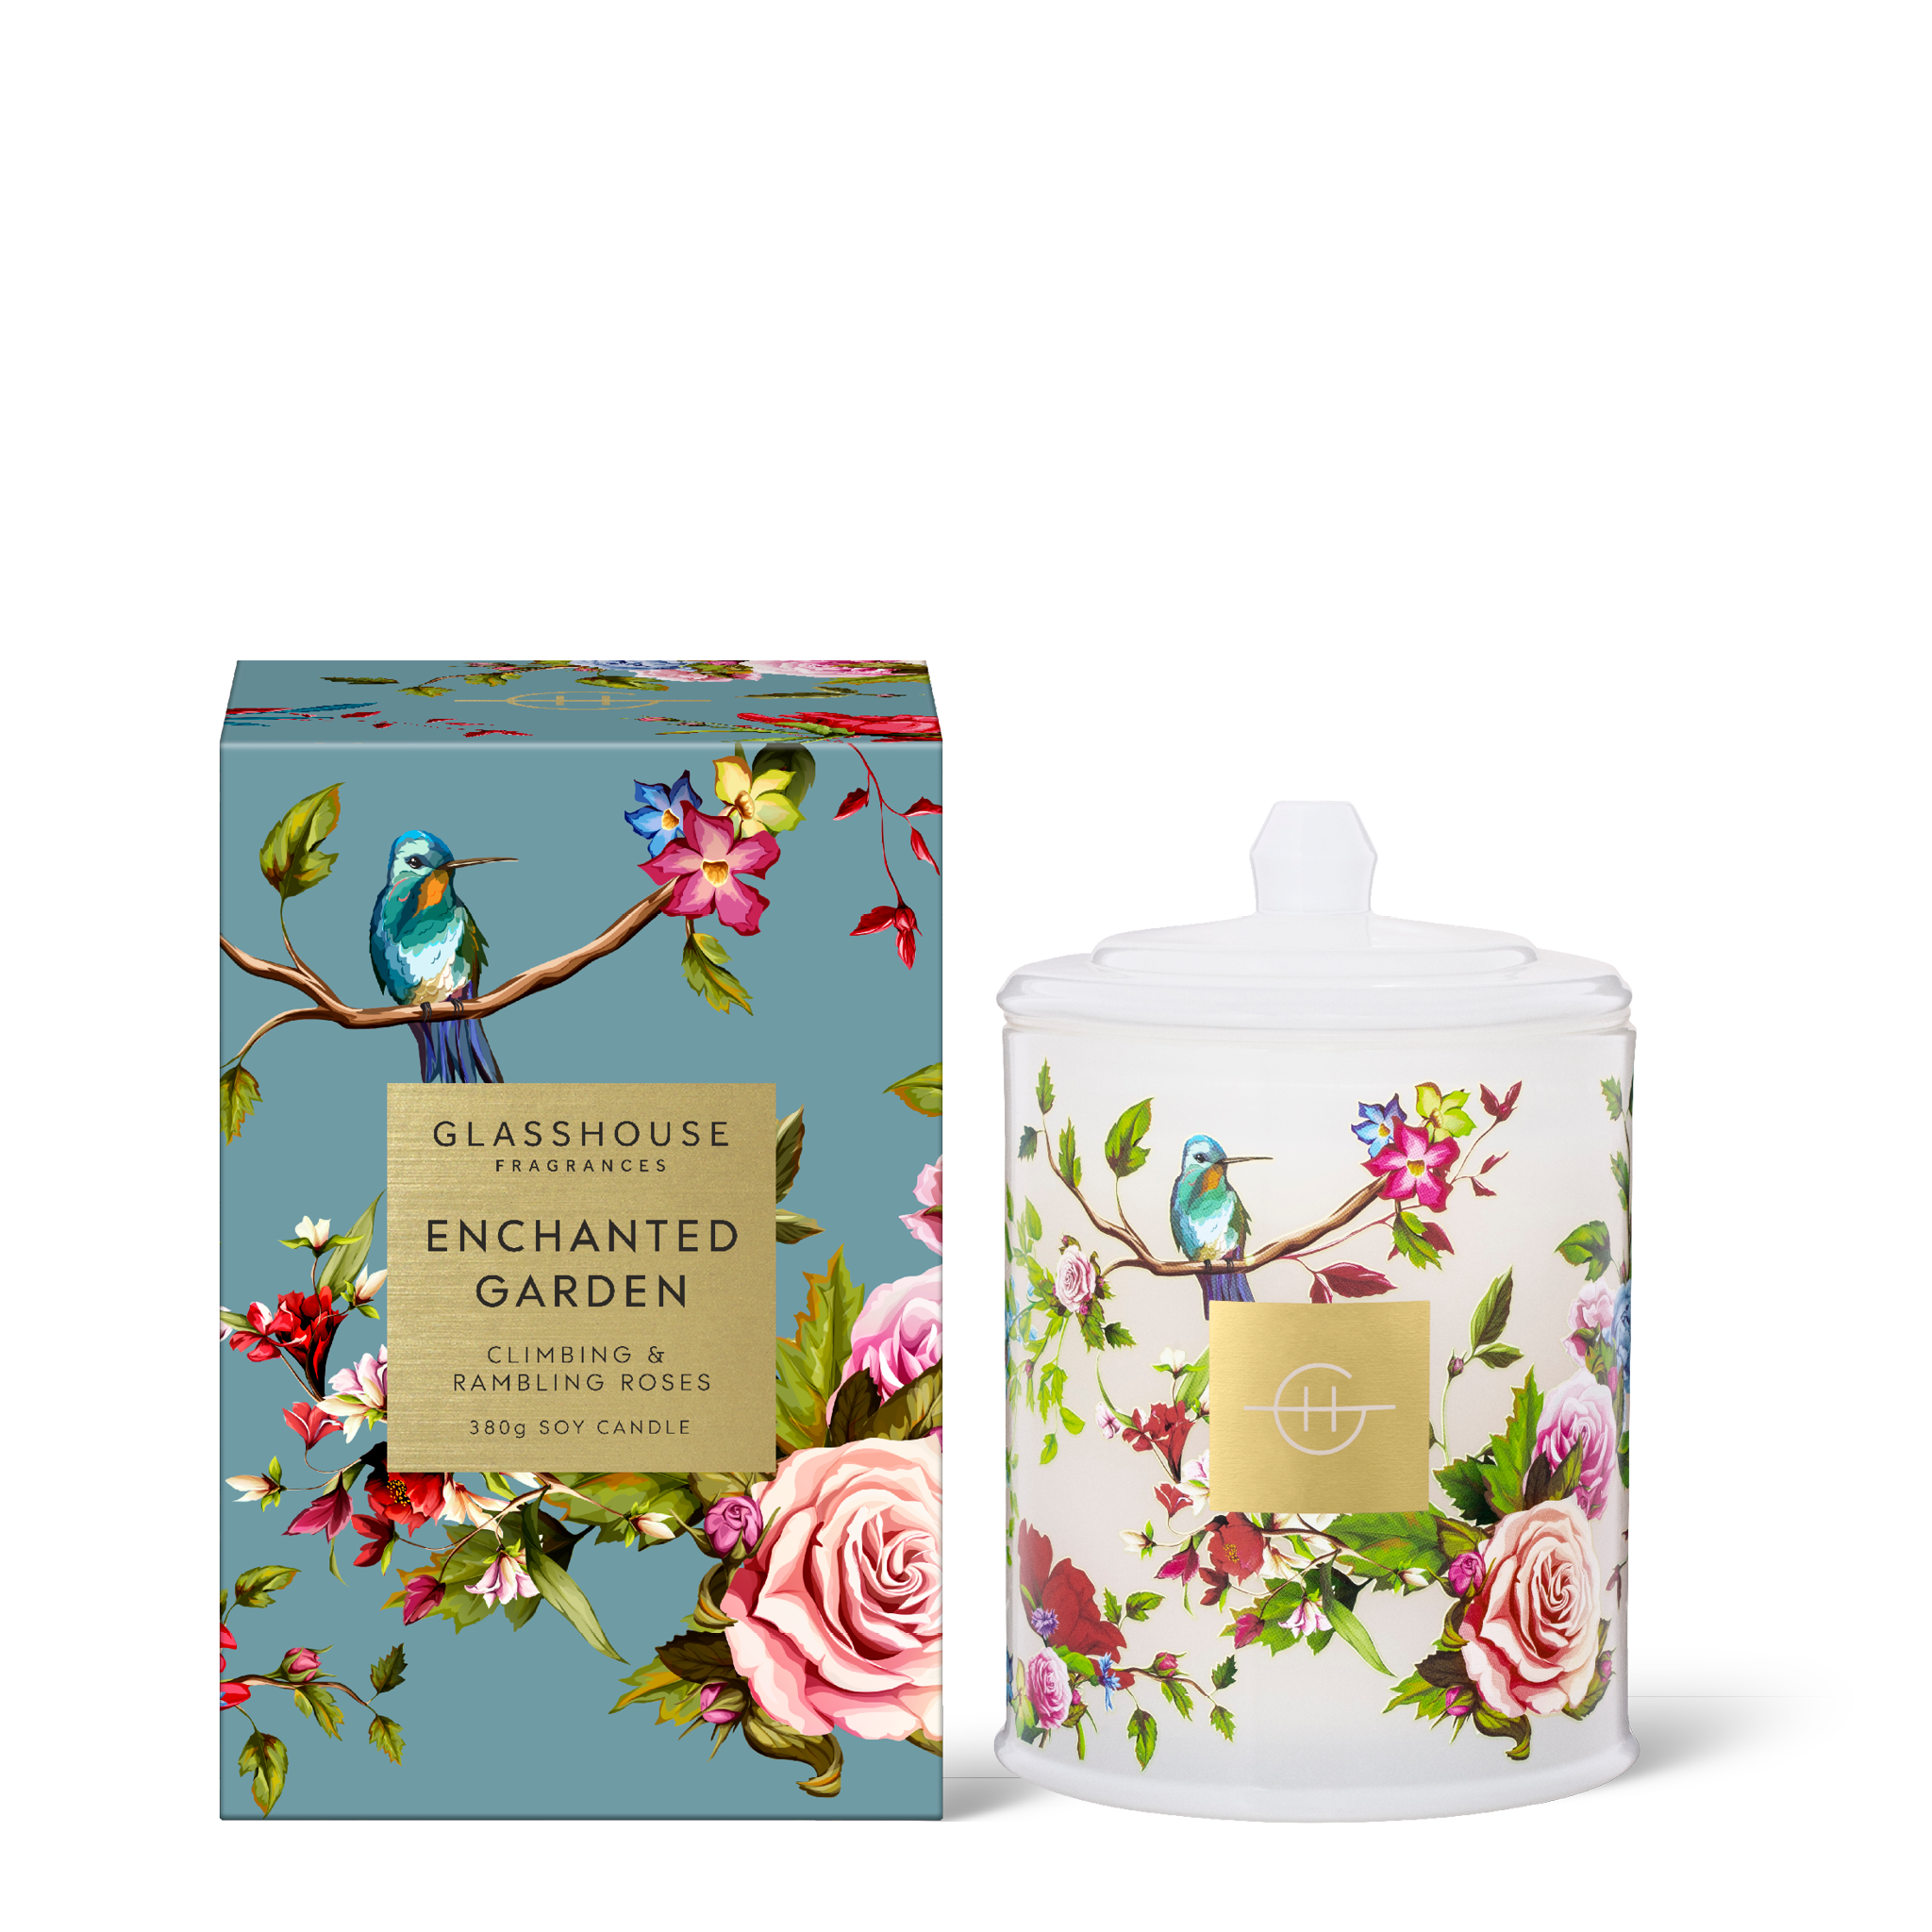 Glasshouse Fragrances Under The Mistletoe Spiced Apple & Red Berries 380g Soy Candle with box